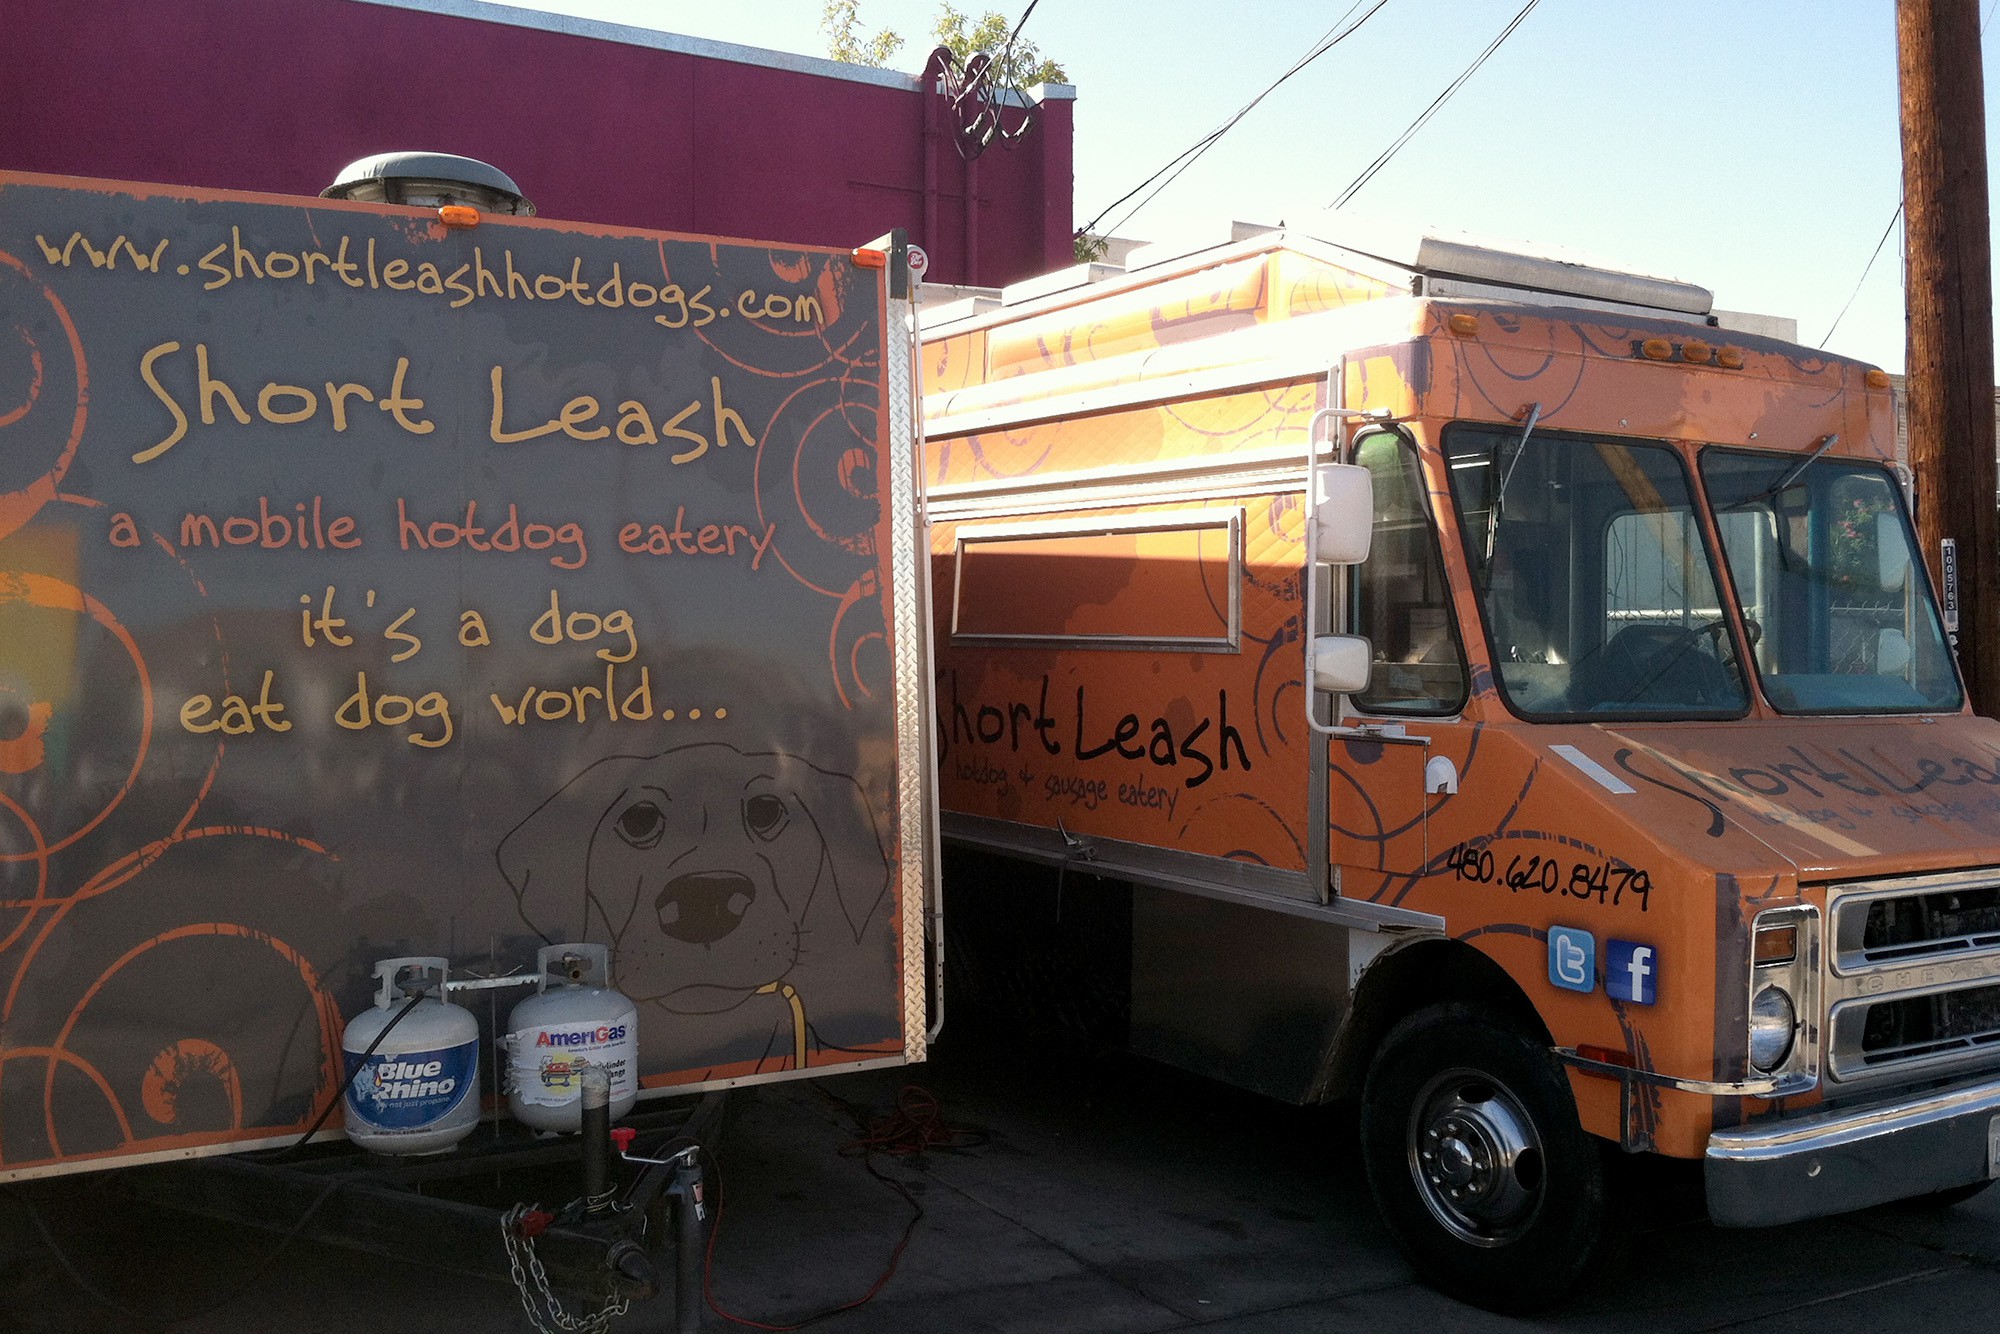 Although it has a restaurant now, Short Leash Hot Dogs still operates a food truck and trailer.